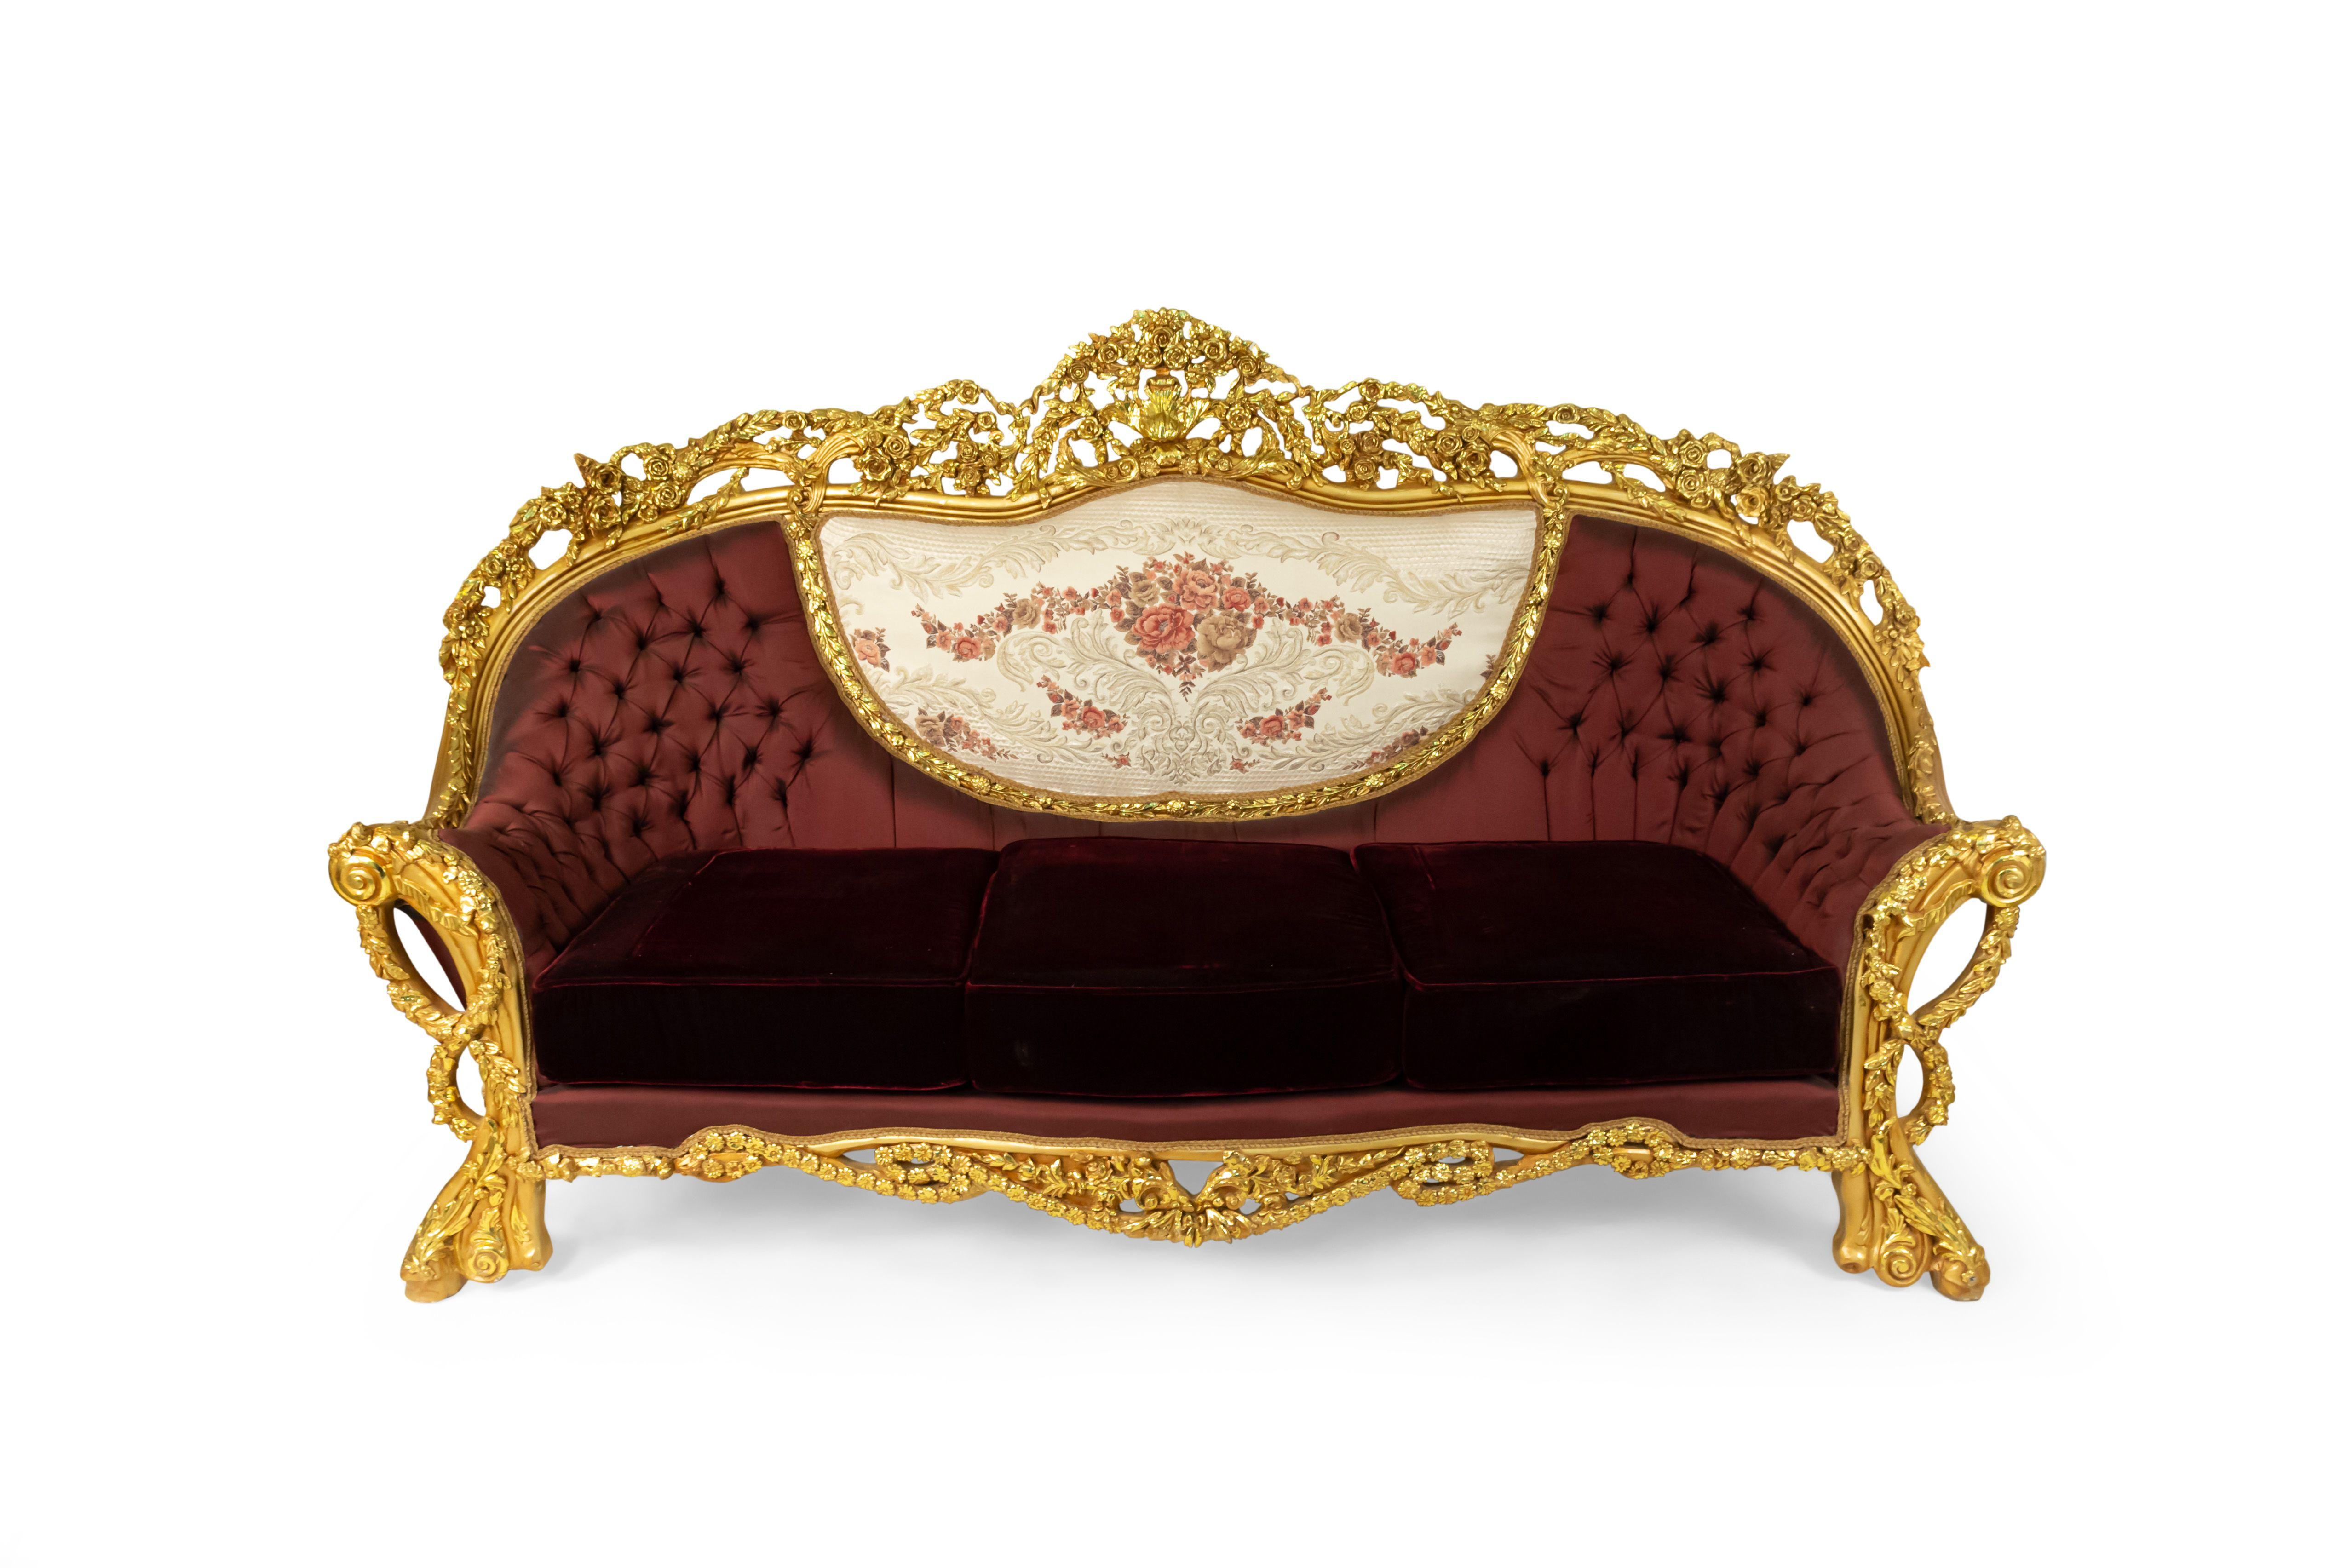 Italian Baroque style 20th century large settee with giltwood filigree frame & button-tufted burgundy & cream upholstery with embroidered flowers and burgundy velvet seat cushions.